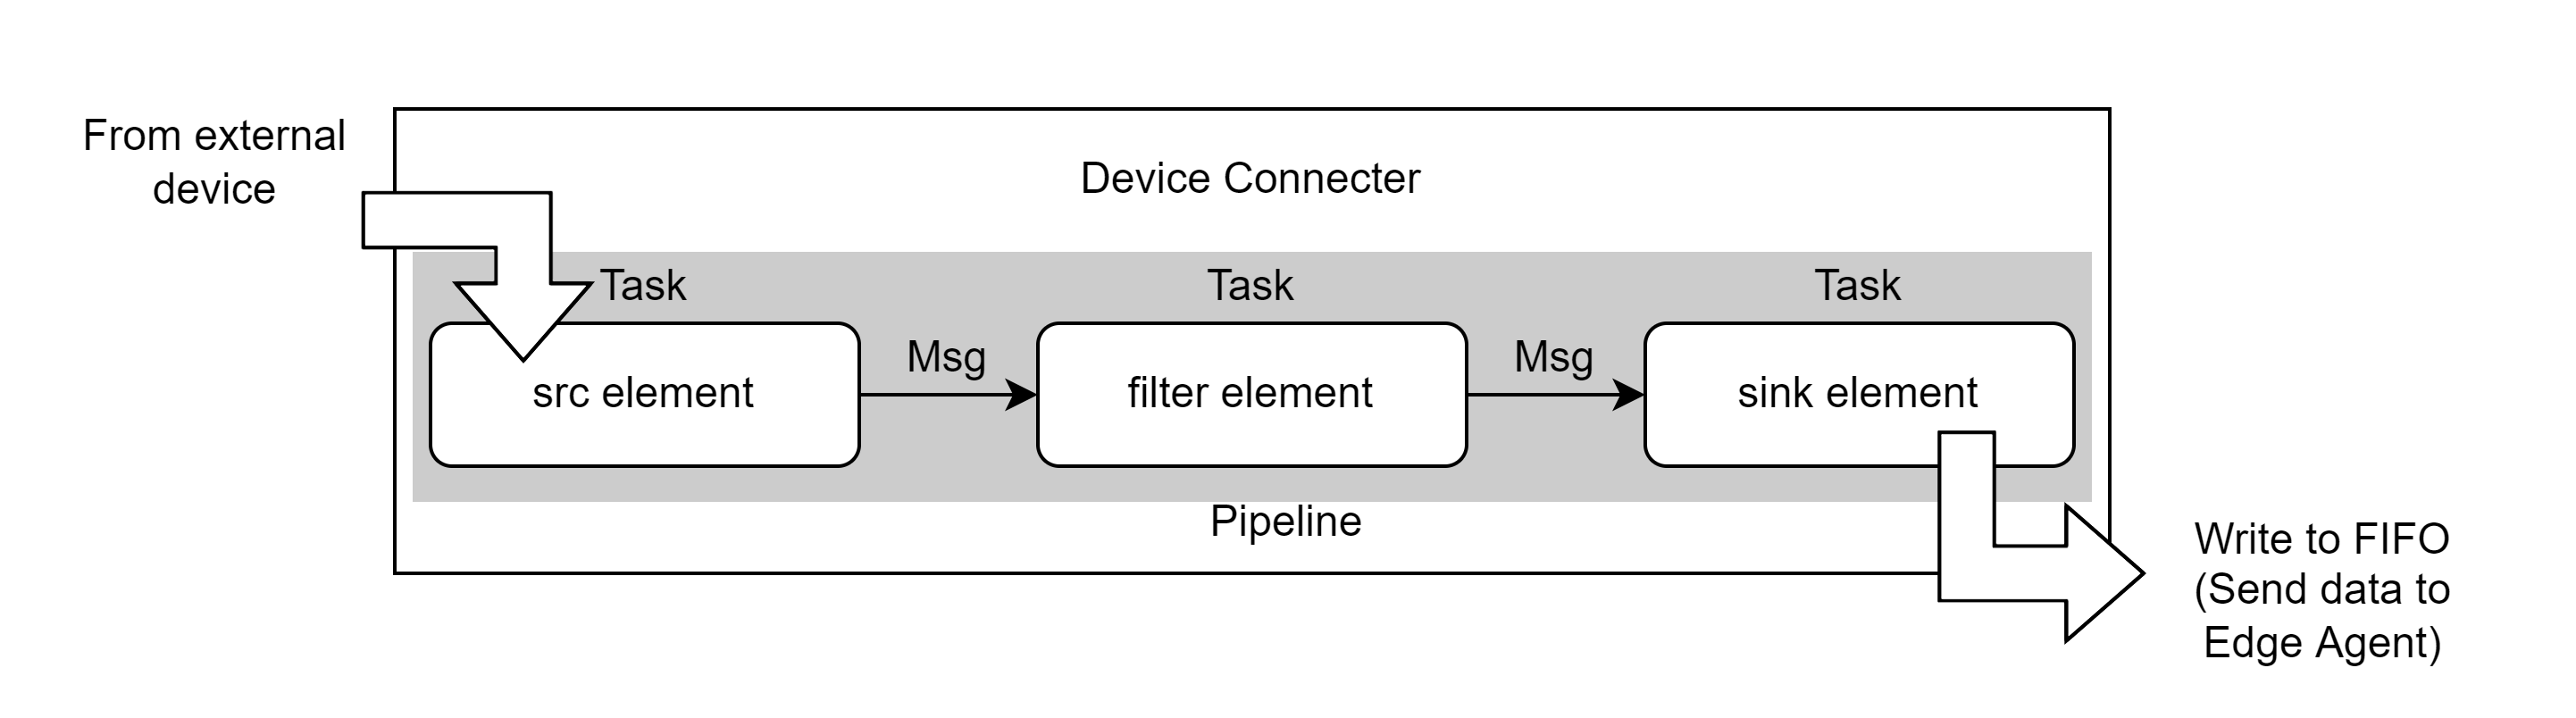 ../_images/device-connector-overview-upstream-element.png